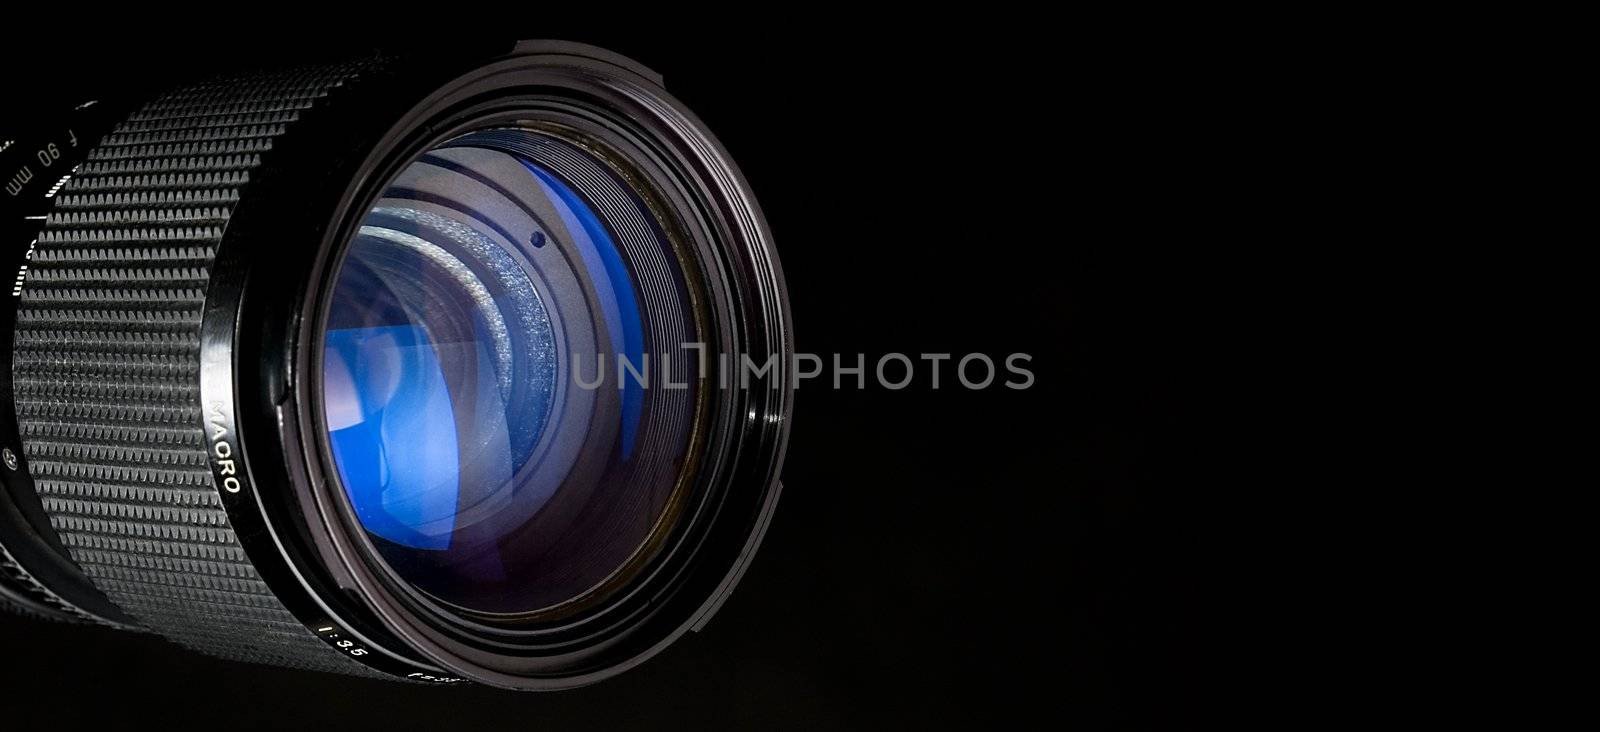 Photograpy lens over black background.